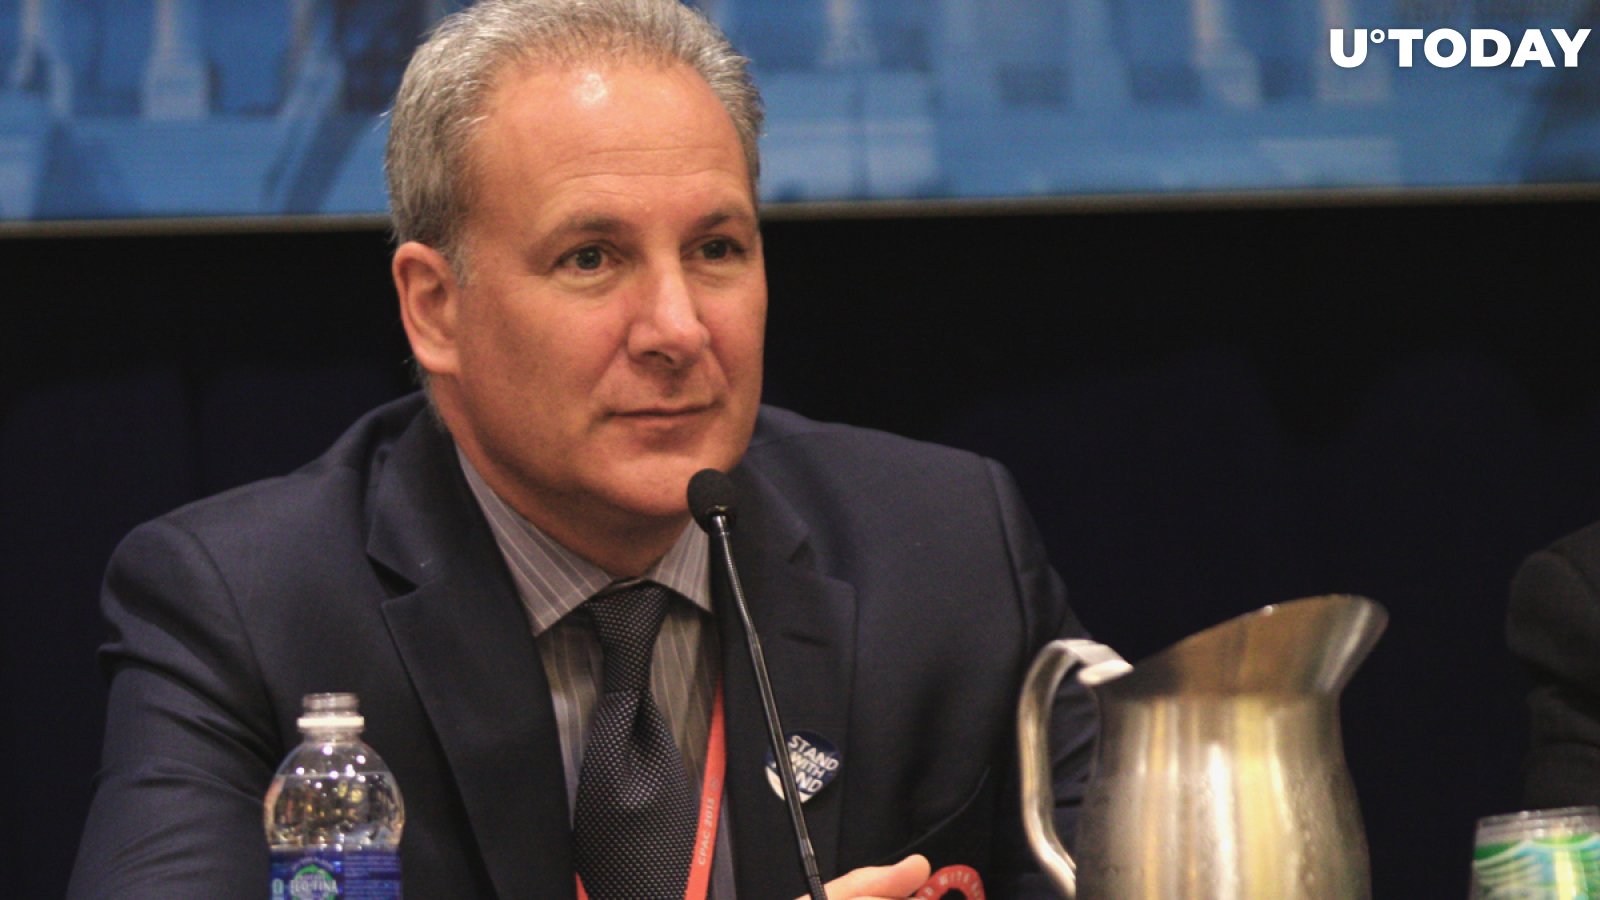 Peter Schiff Says Bitcoin Is Running Out of Buyers to 'Keep Ponzi Going'